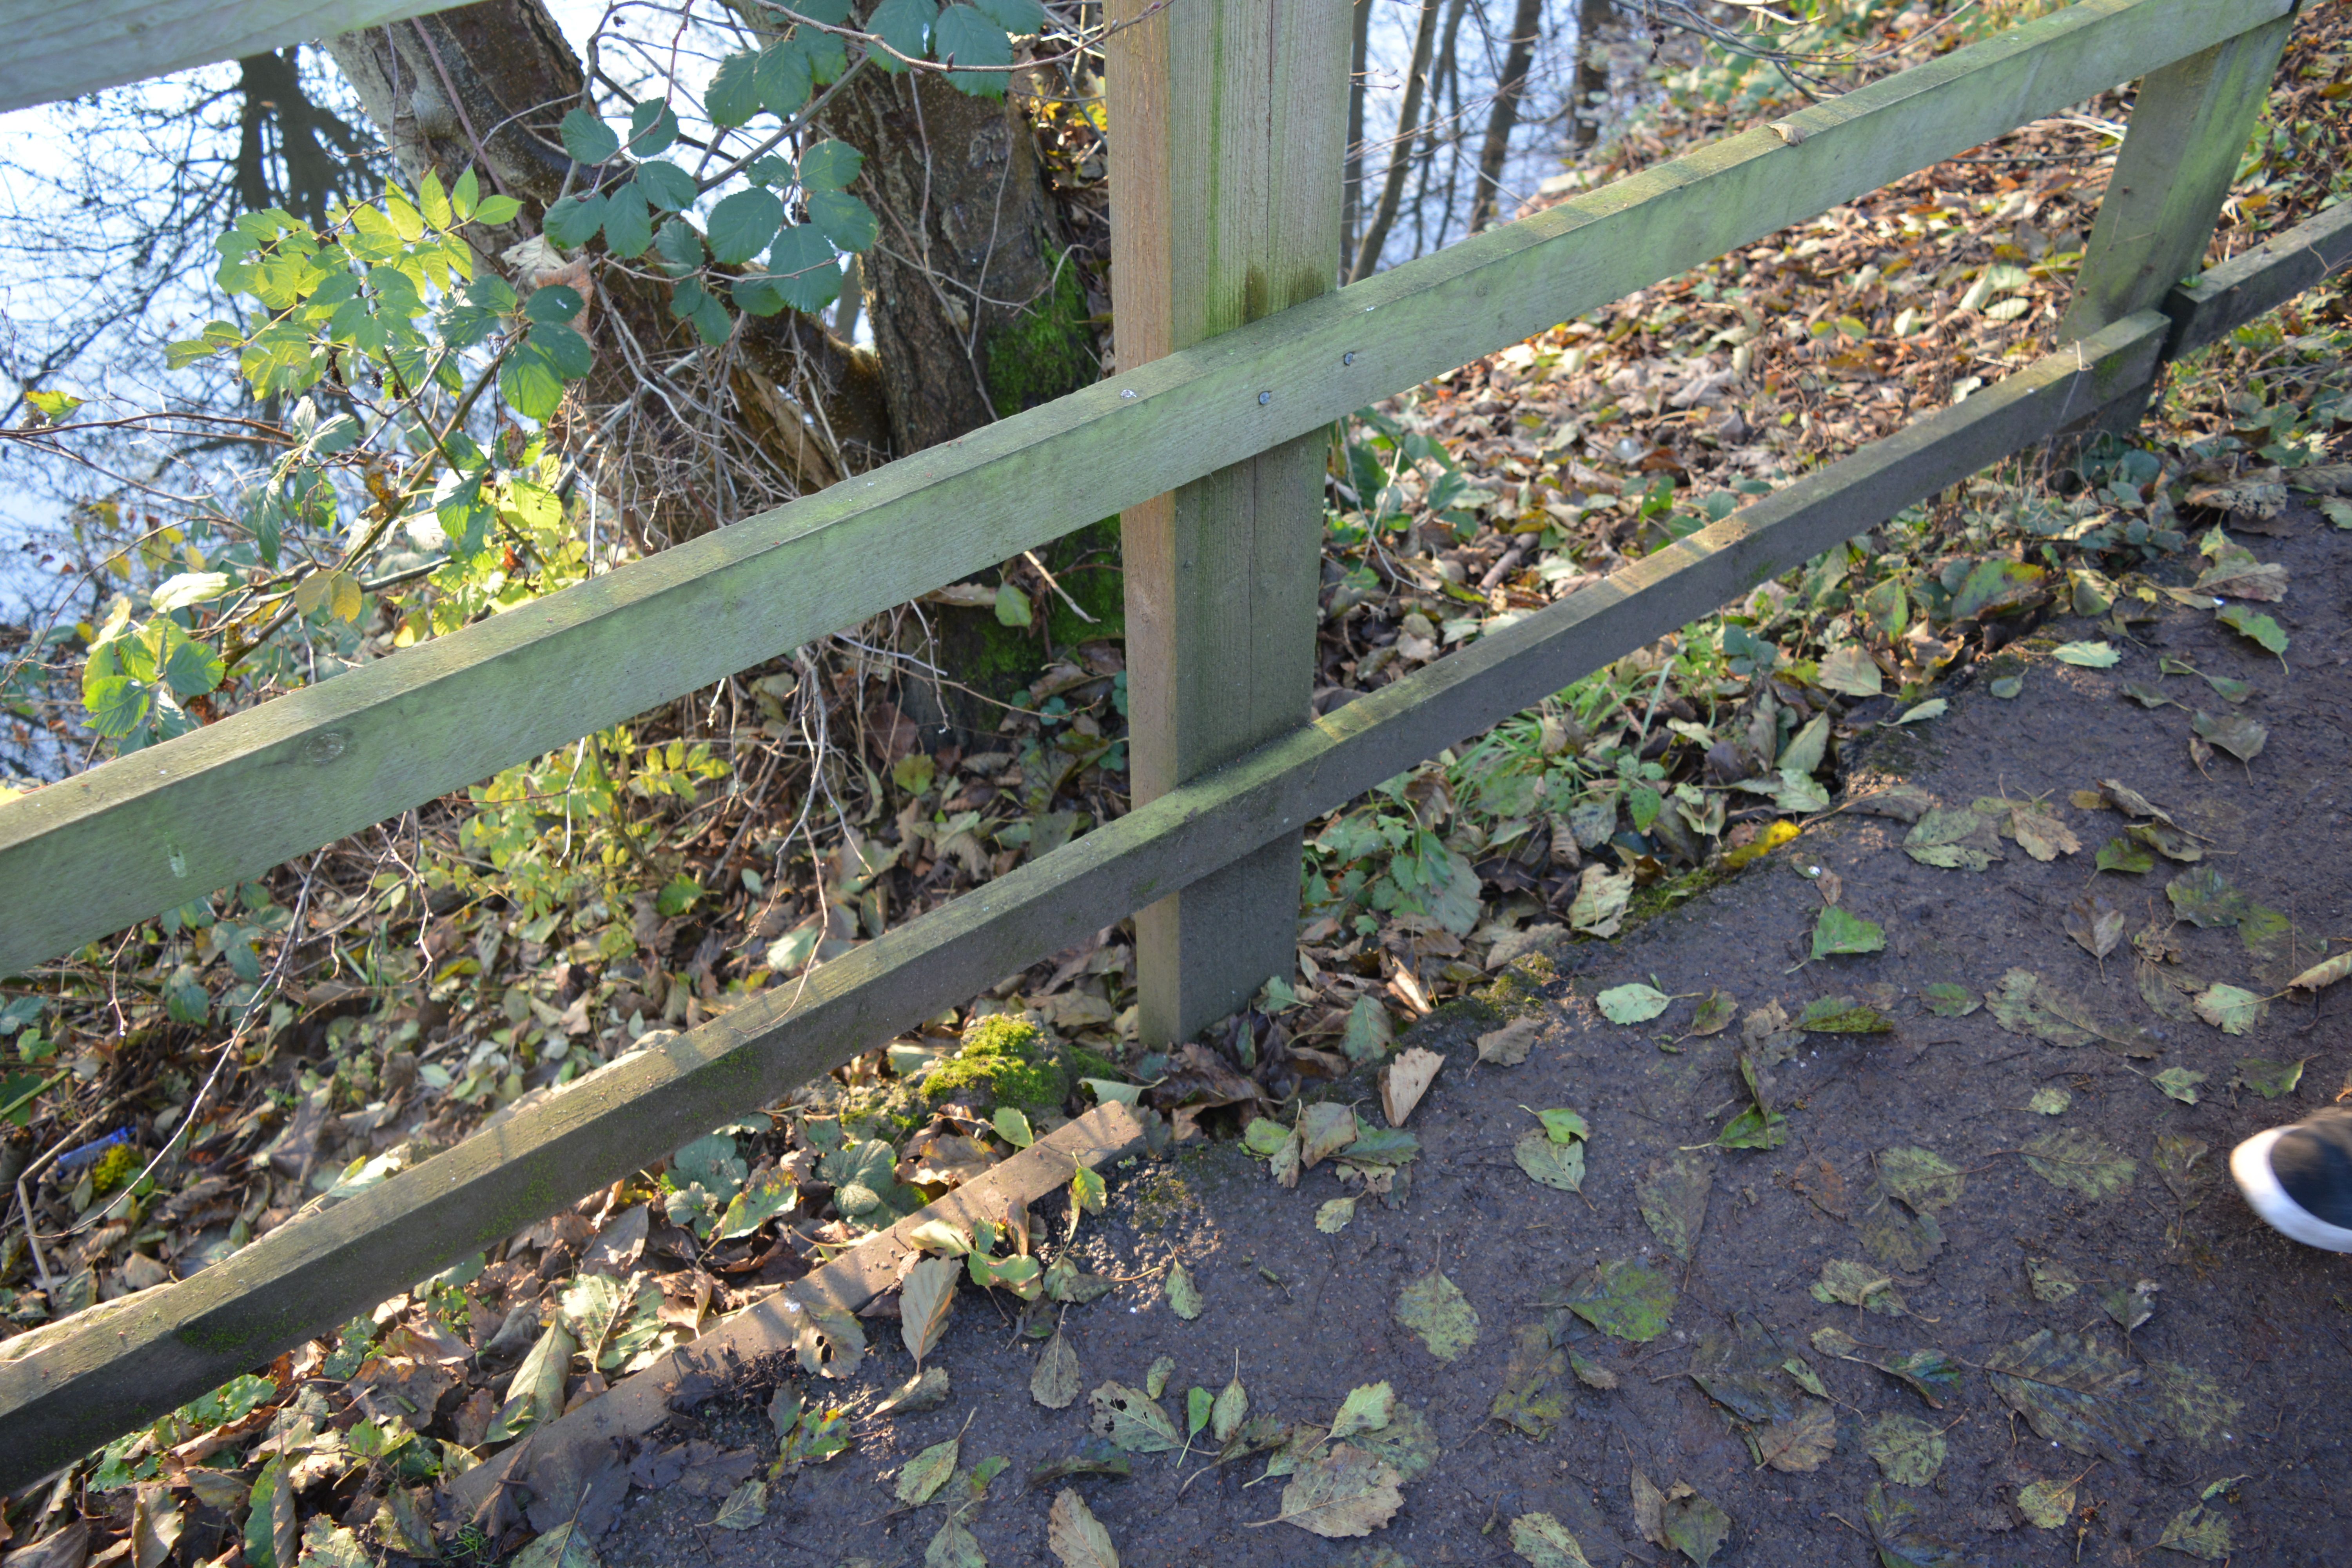 Good fence barrier; not to ground level